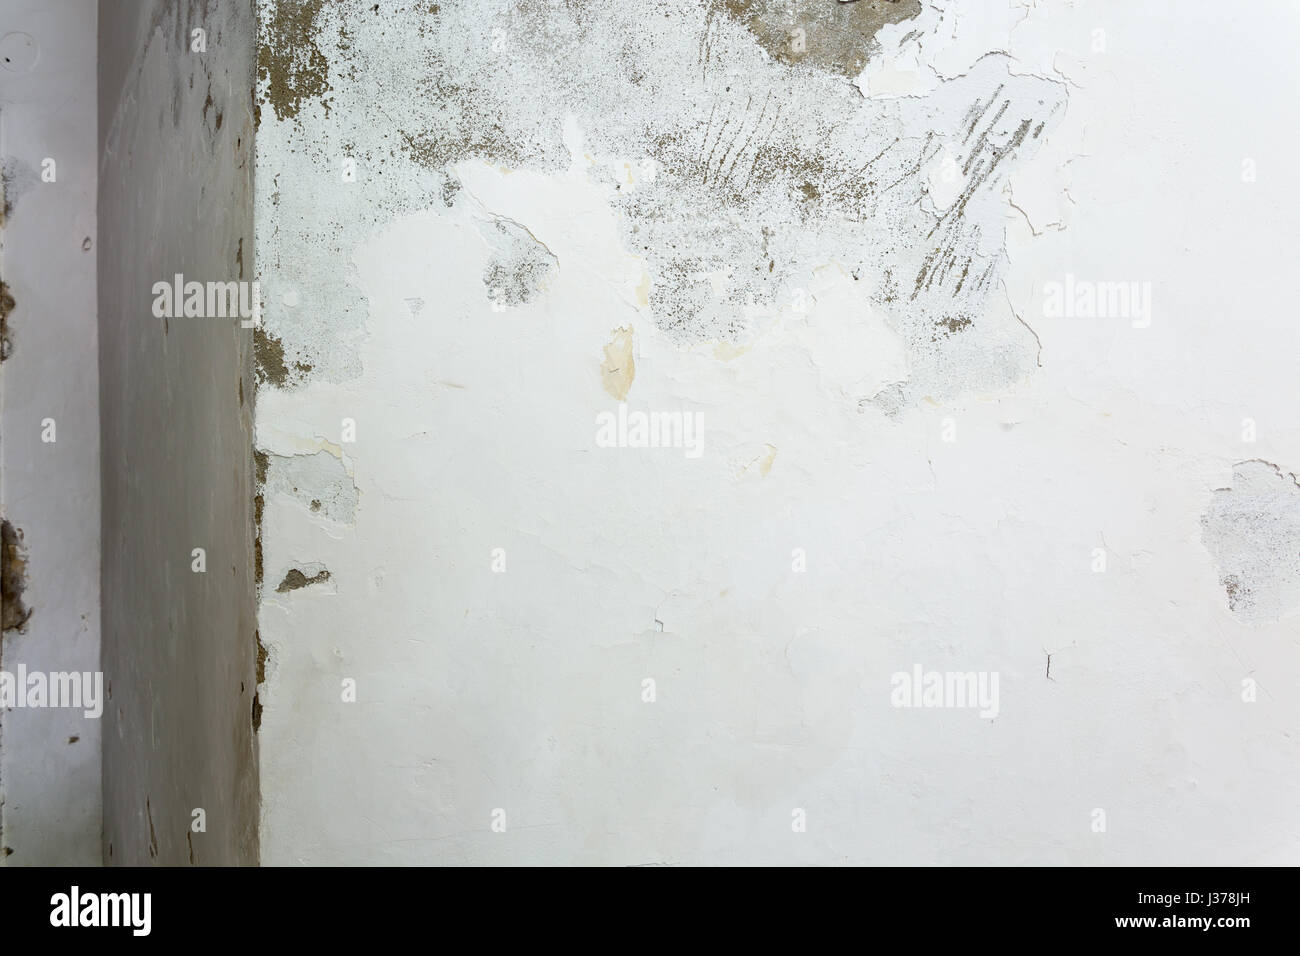 Peeling and flaking paint due to rising damp on interior wall Stock Photo